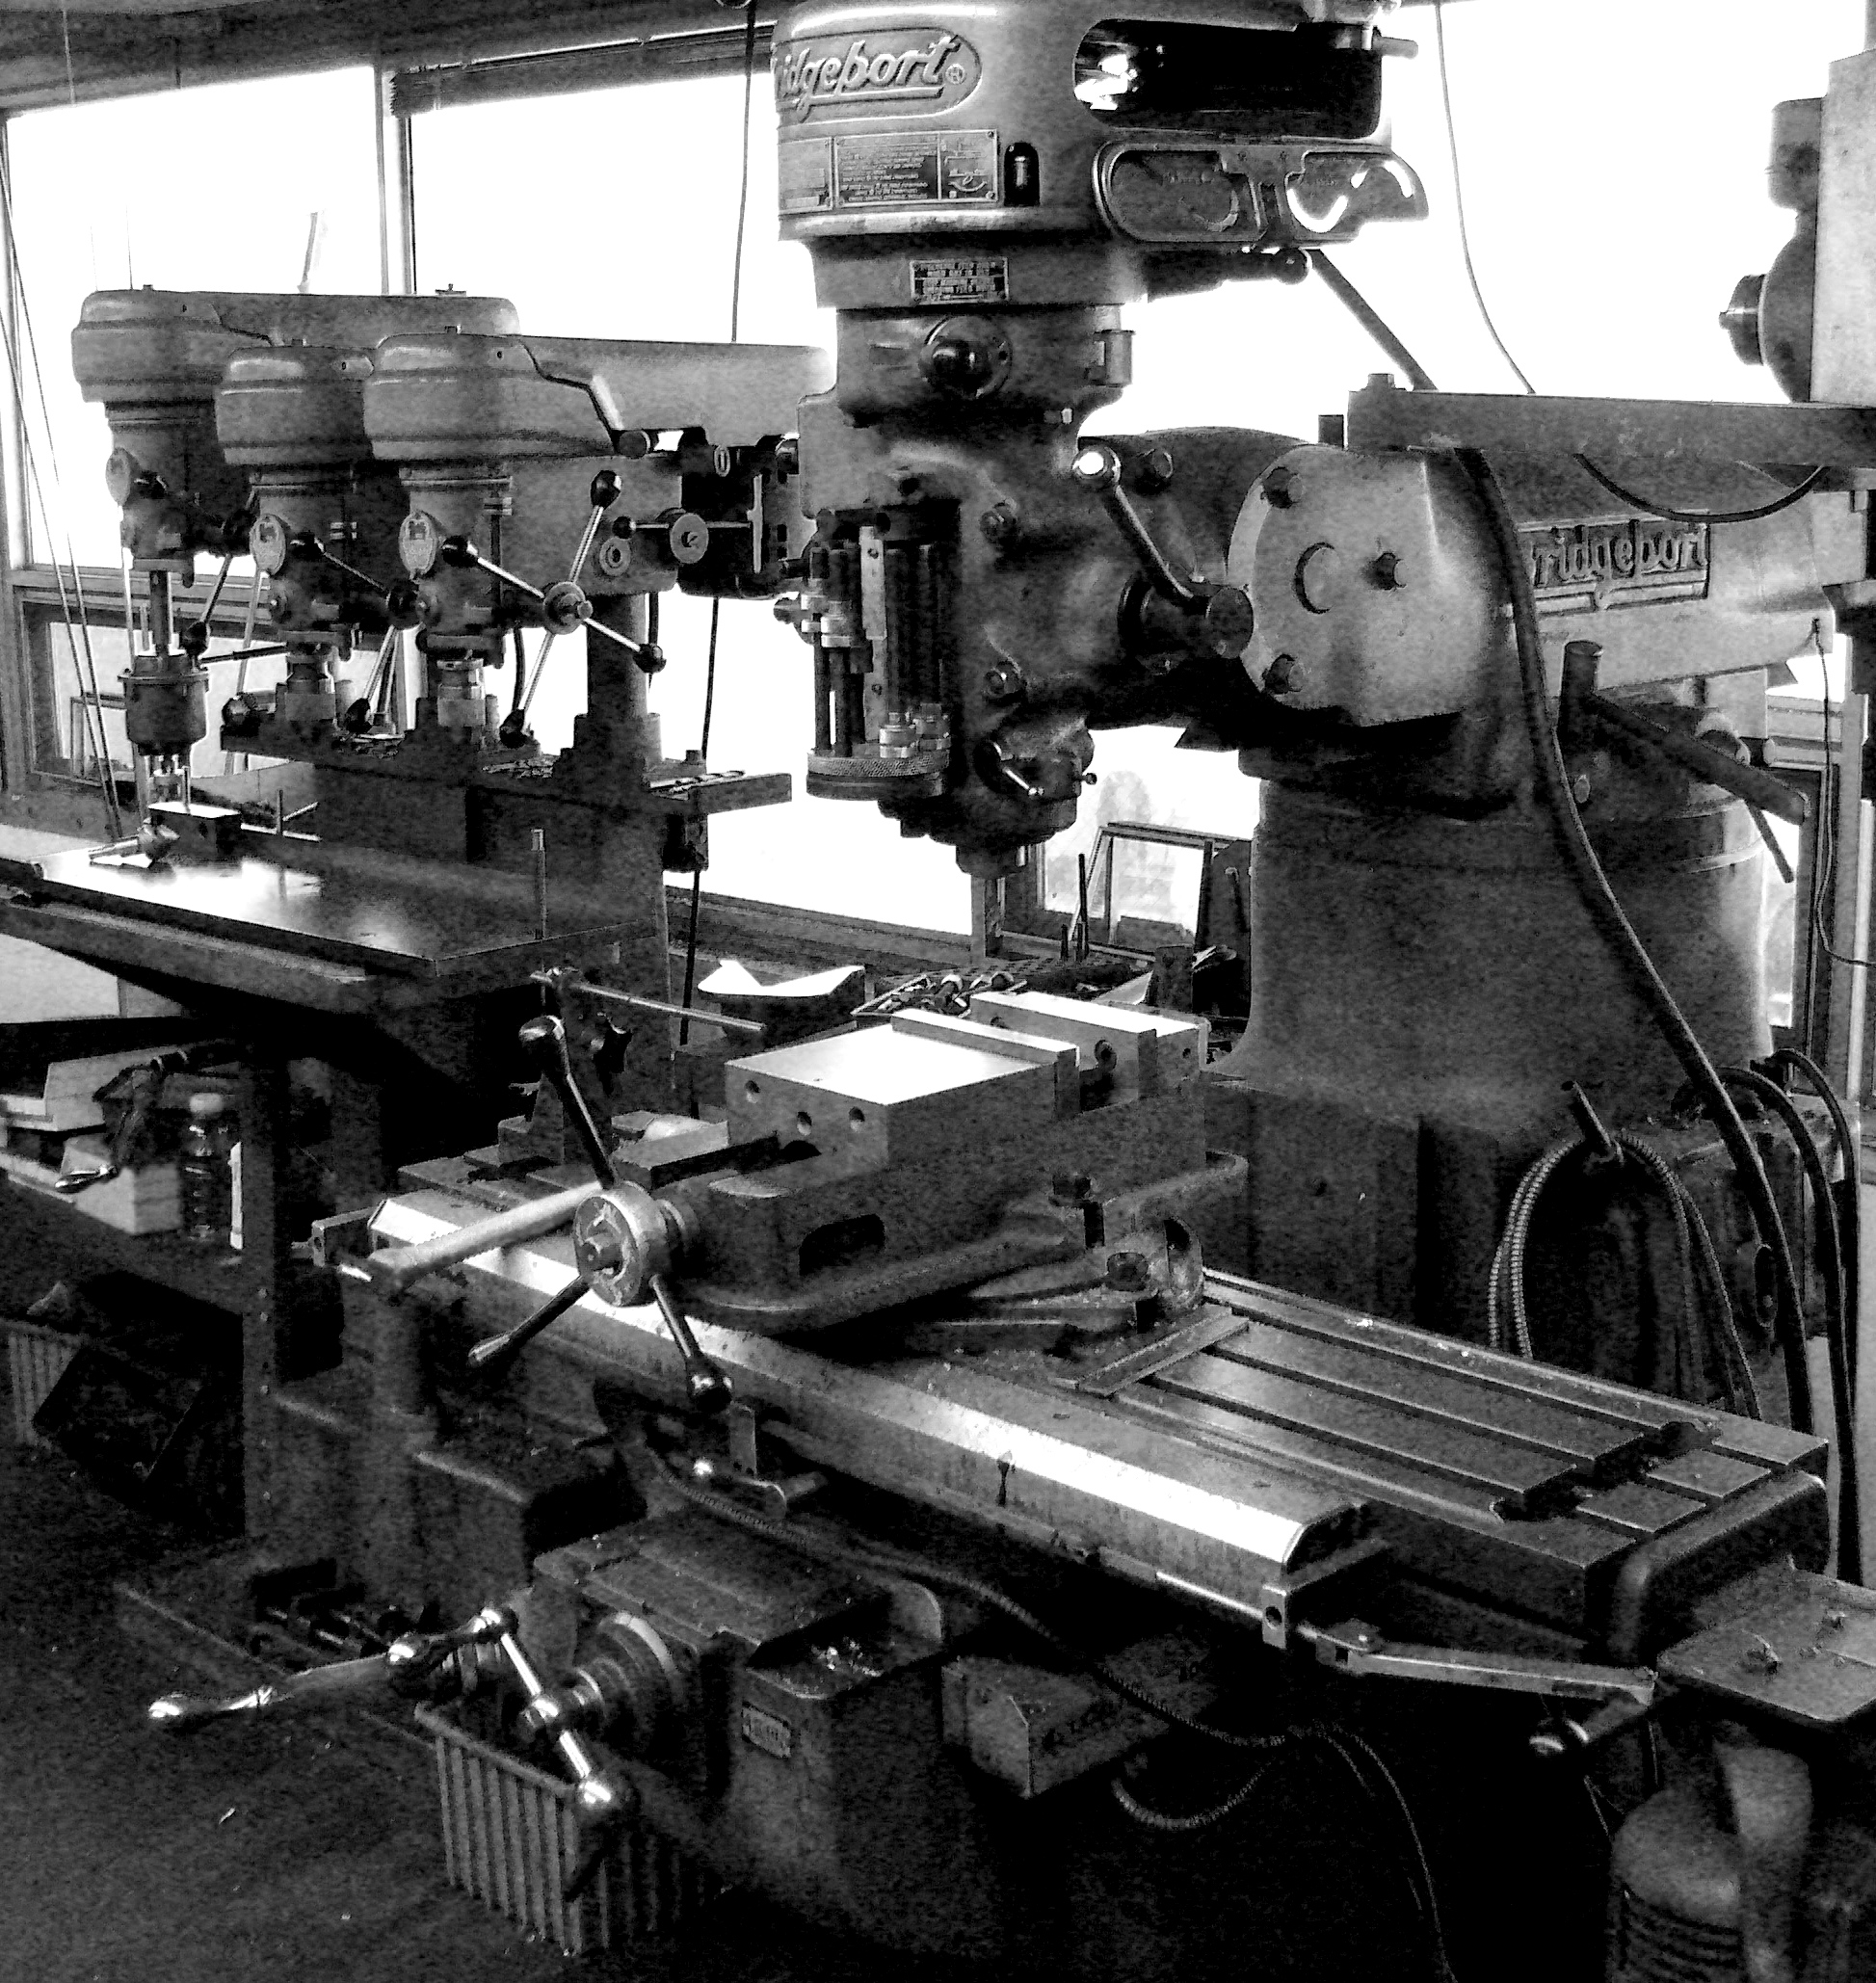 A black and white photo of a bridgeport milling machine.